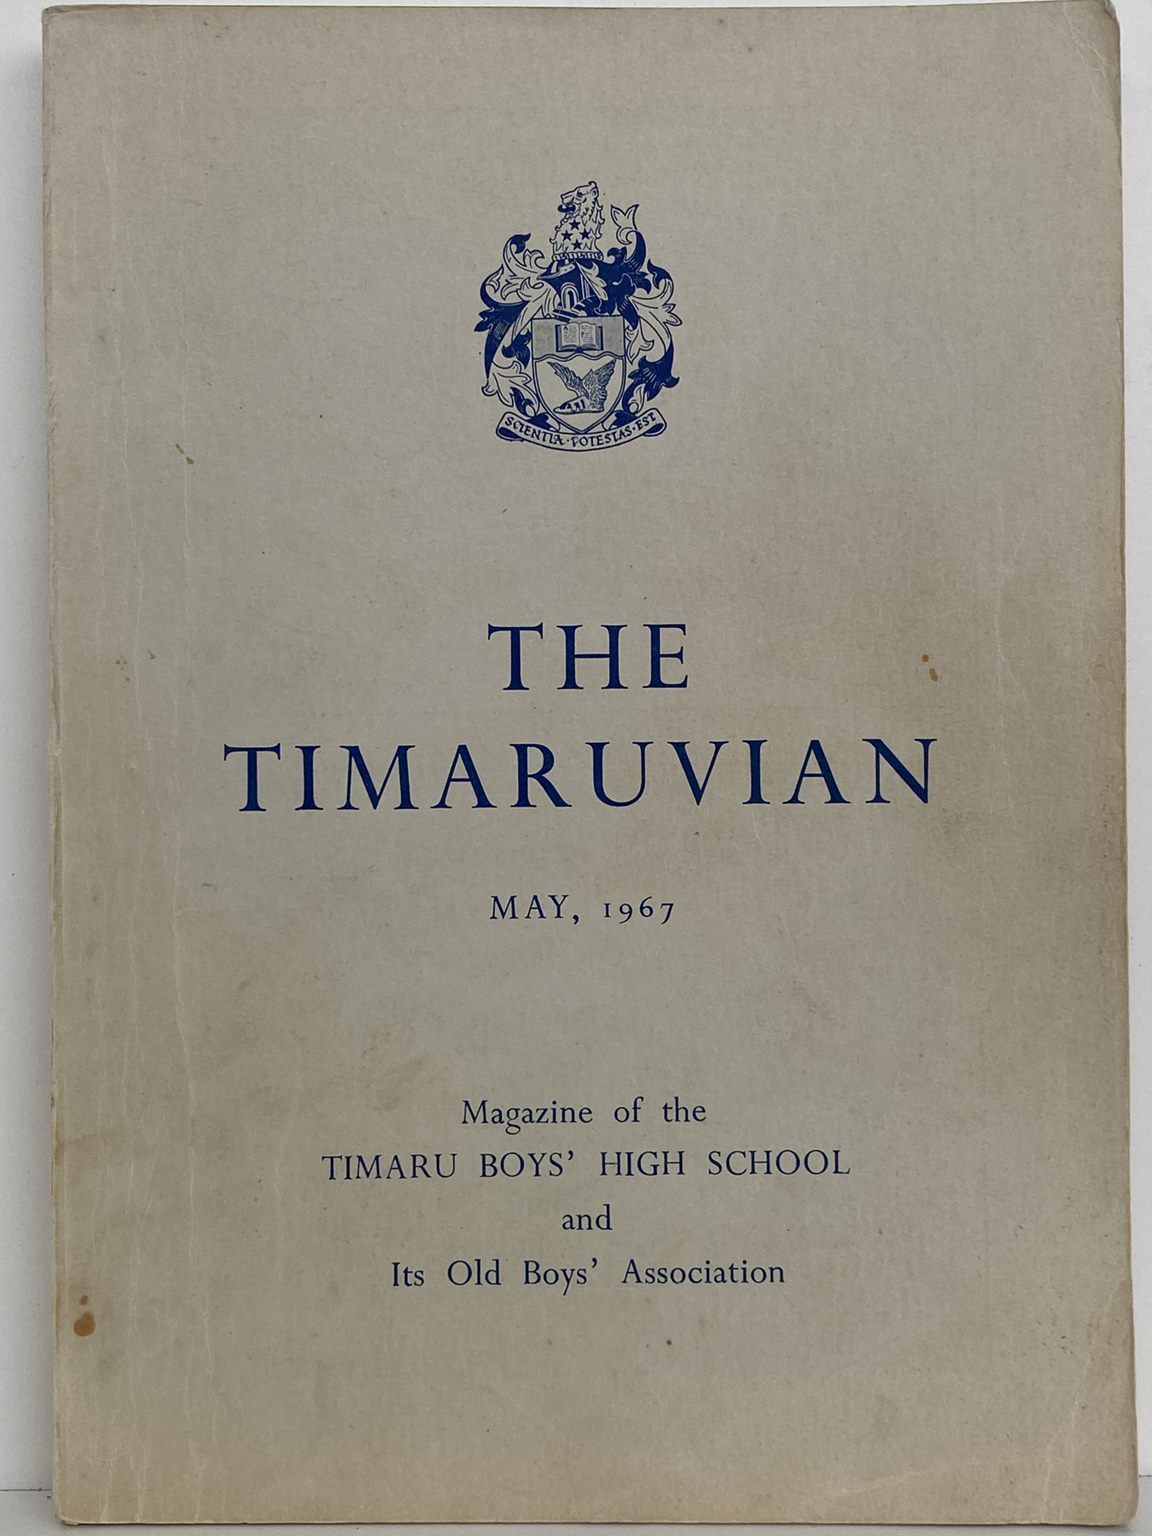 THE TIMARUVIAN: Magazine of the Timaru Boys' High School and its Old Boys' Association 1967